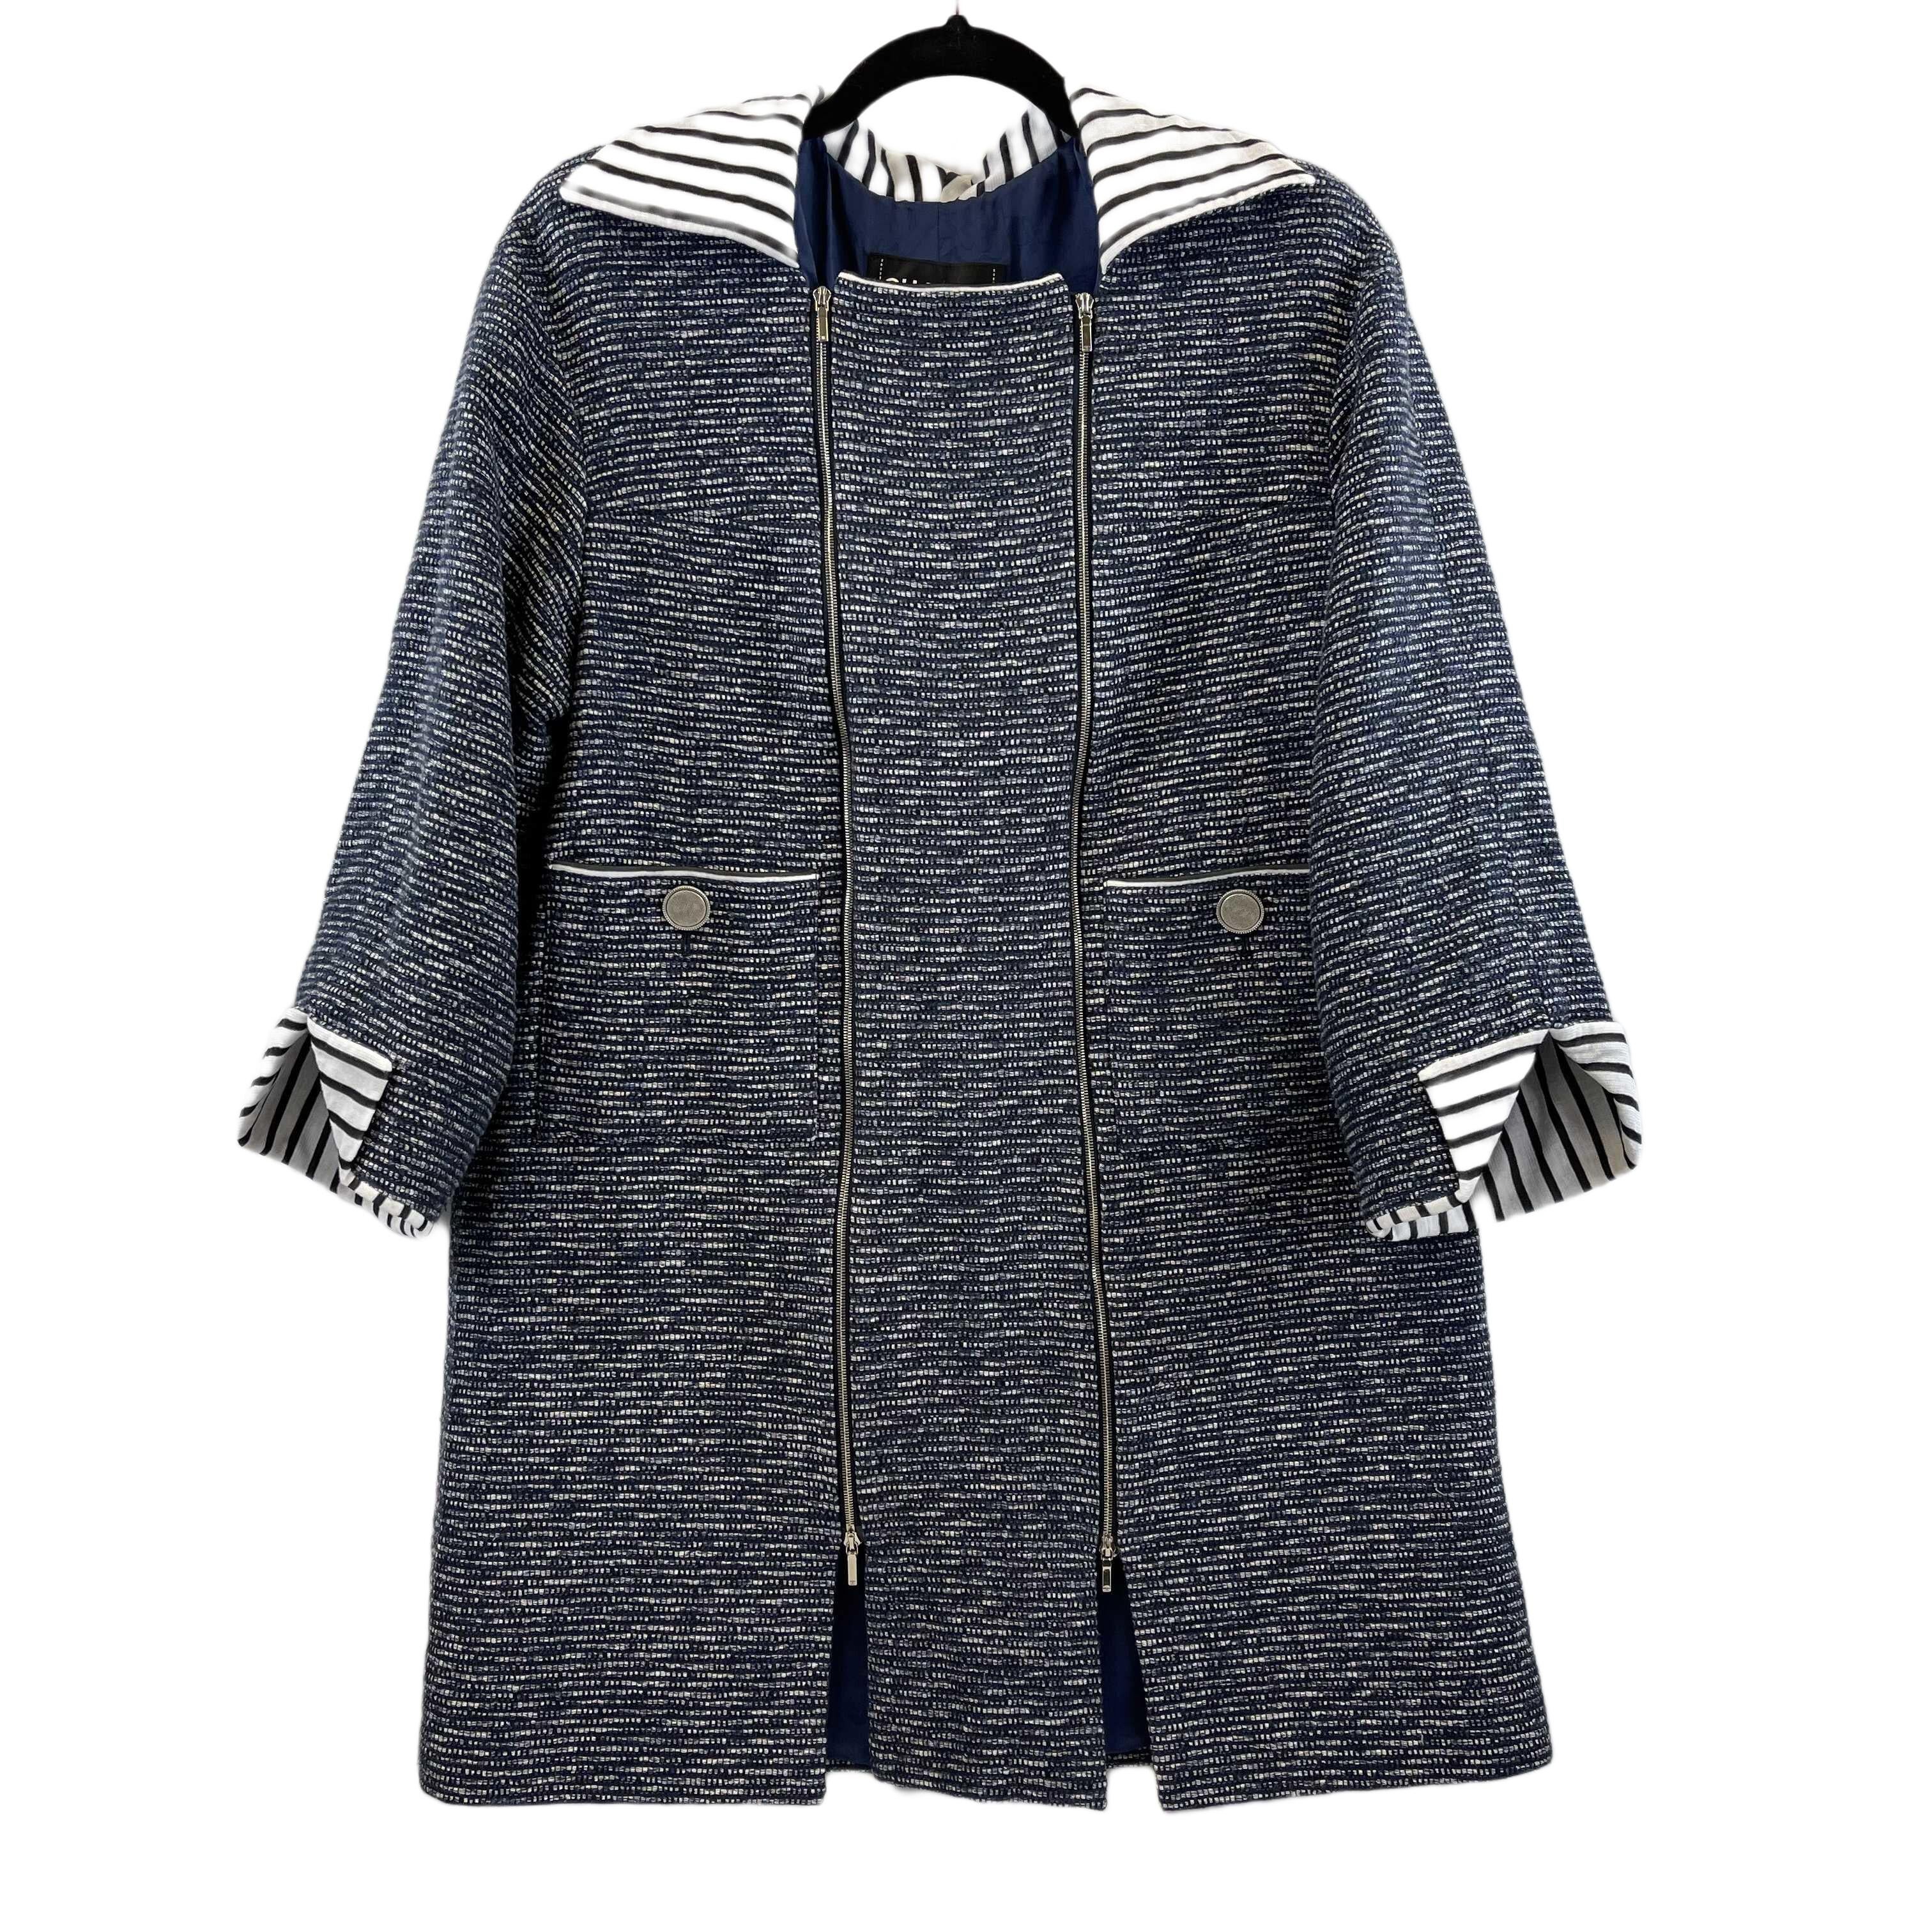 CHANEL- Spring 2017 Fantasy Tweed Coat - Navy & White - 38 US 6 NWT For Sale 1